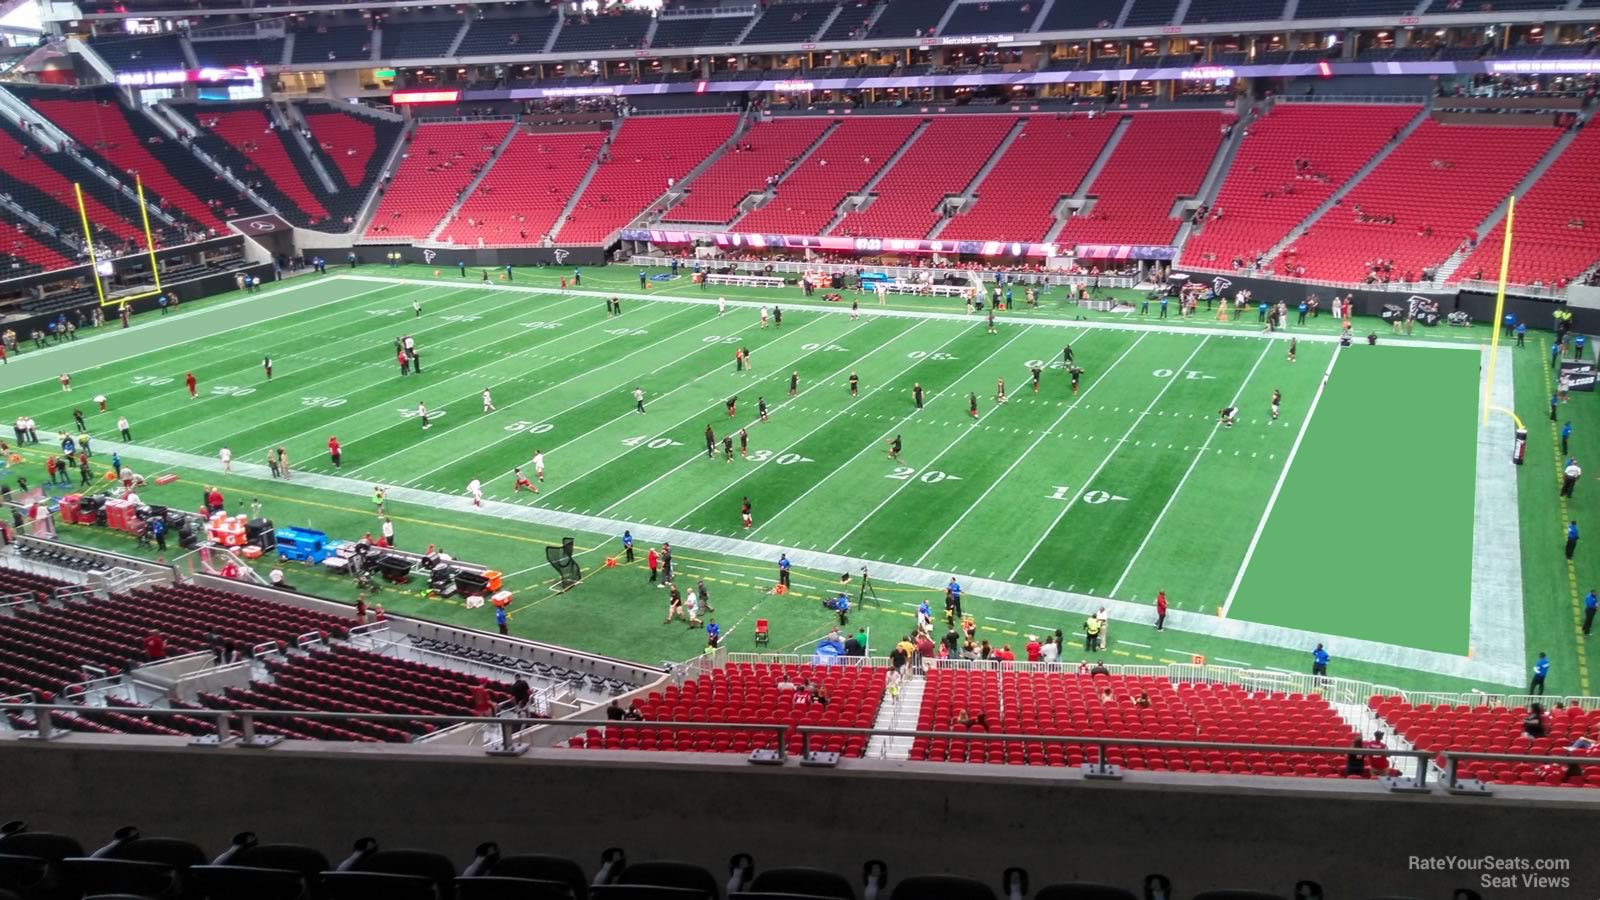 section 232, row 6 seat view  for football - mercedes-benz stadium